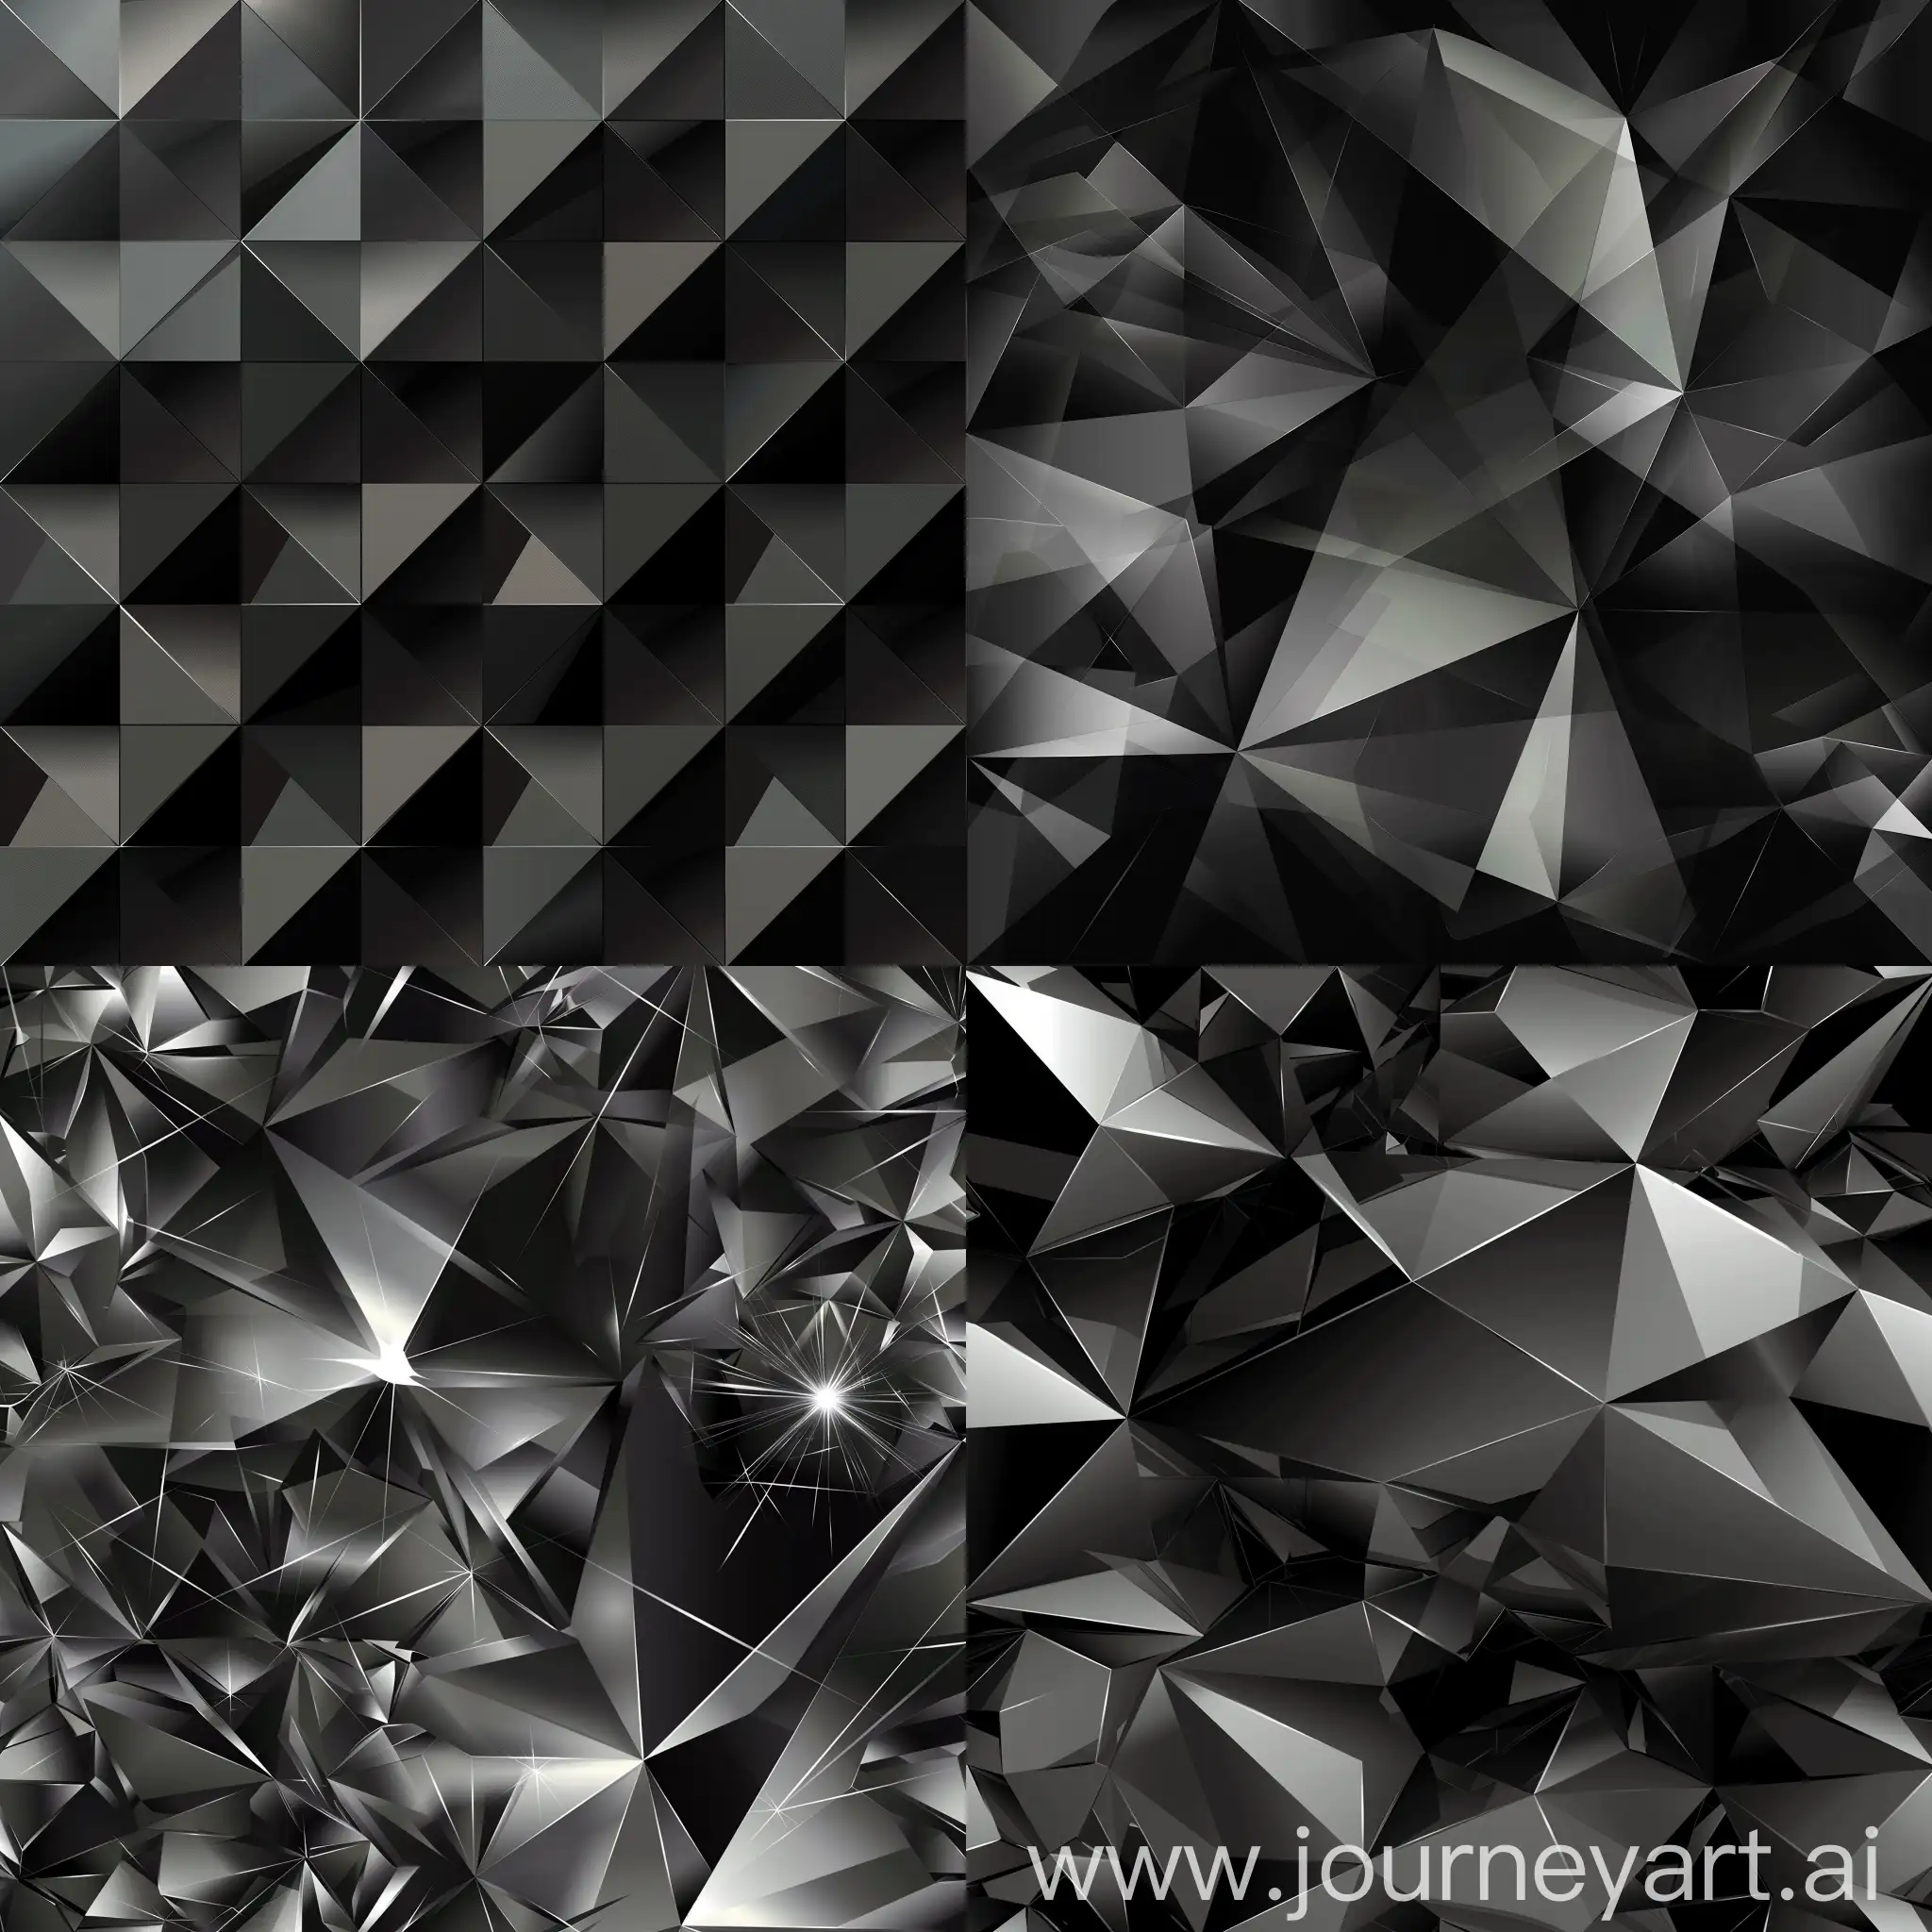 Abstract-Background-Pattern-in-Black-and-Gray-Diamonds